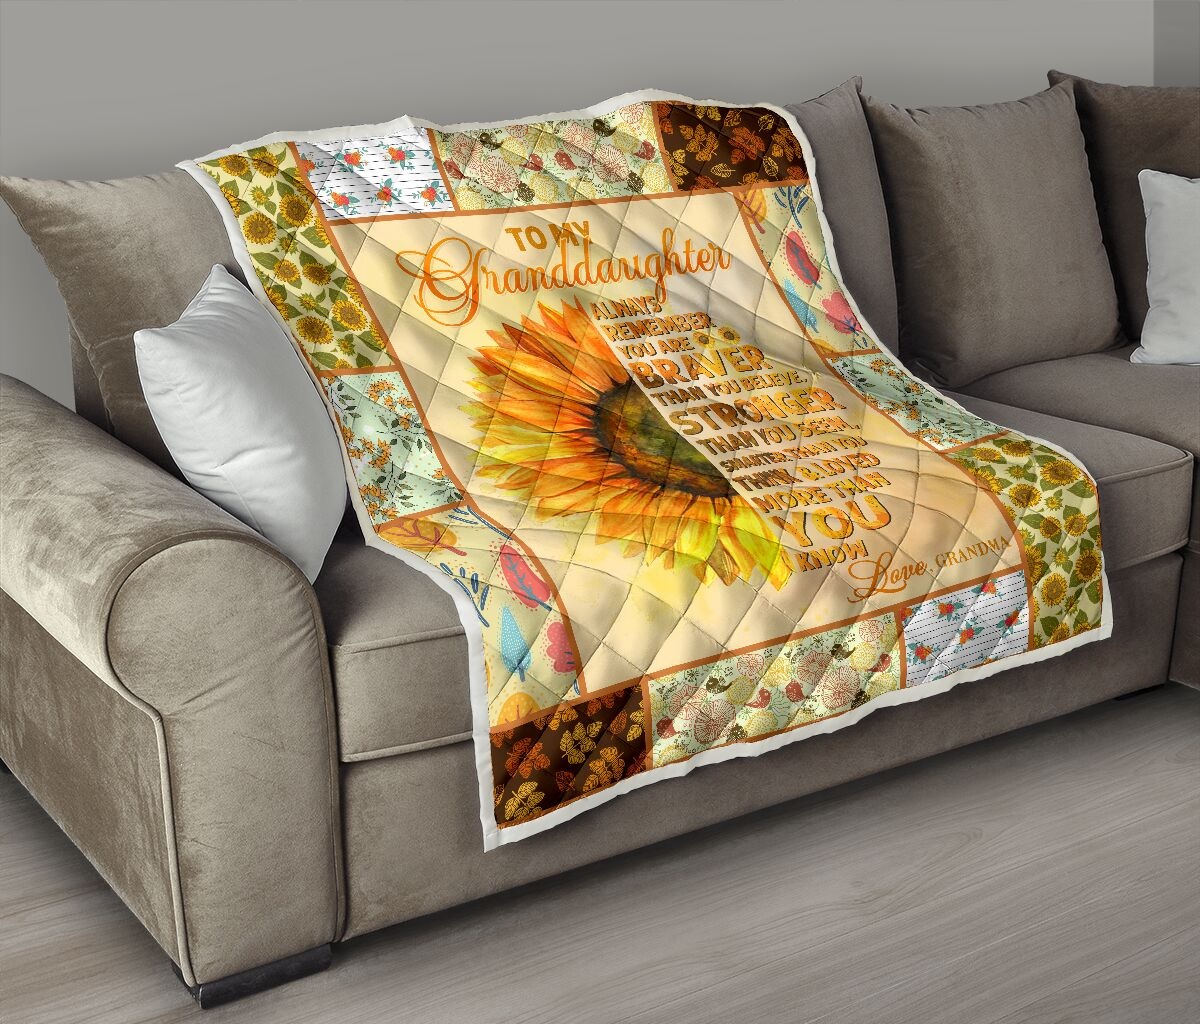 To my granddaughter always remember you are braver than you believe sunflower quilt 2